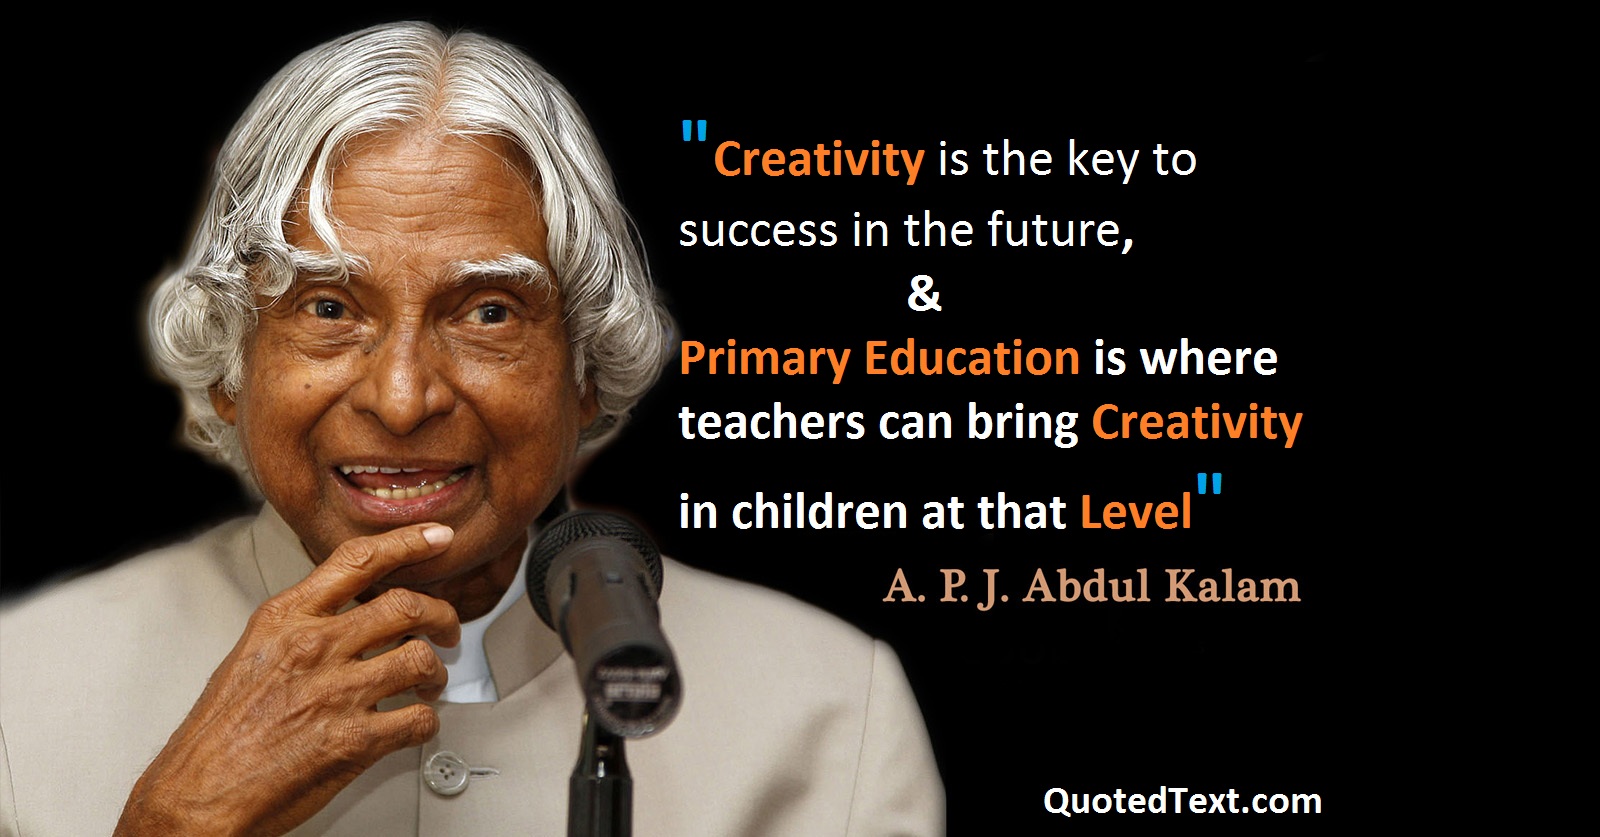 Best of APJ Abdul Kalam Quotes with Images you will Like